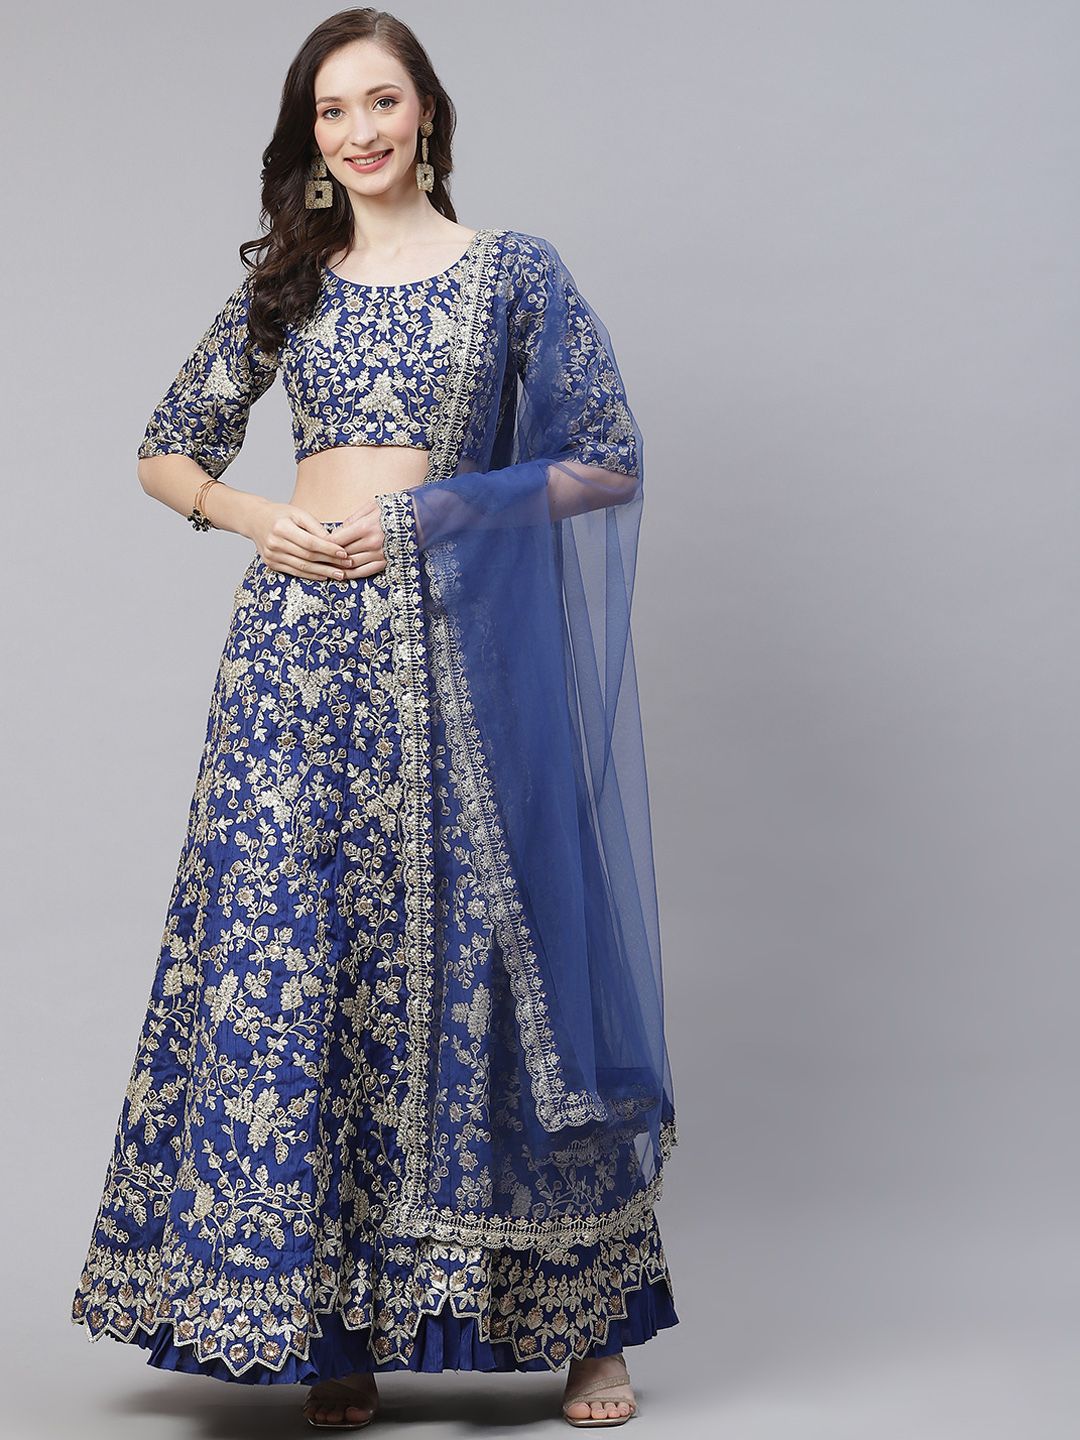 Readiprint Fashions Blue Embroidered Semi-Stitched Lehenga & Unstitched Blouse With Dupatta Price in India